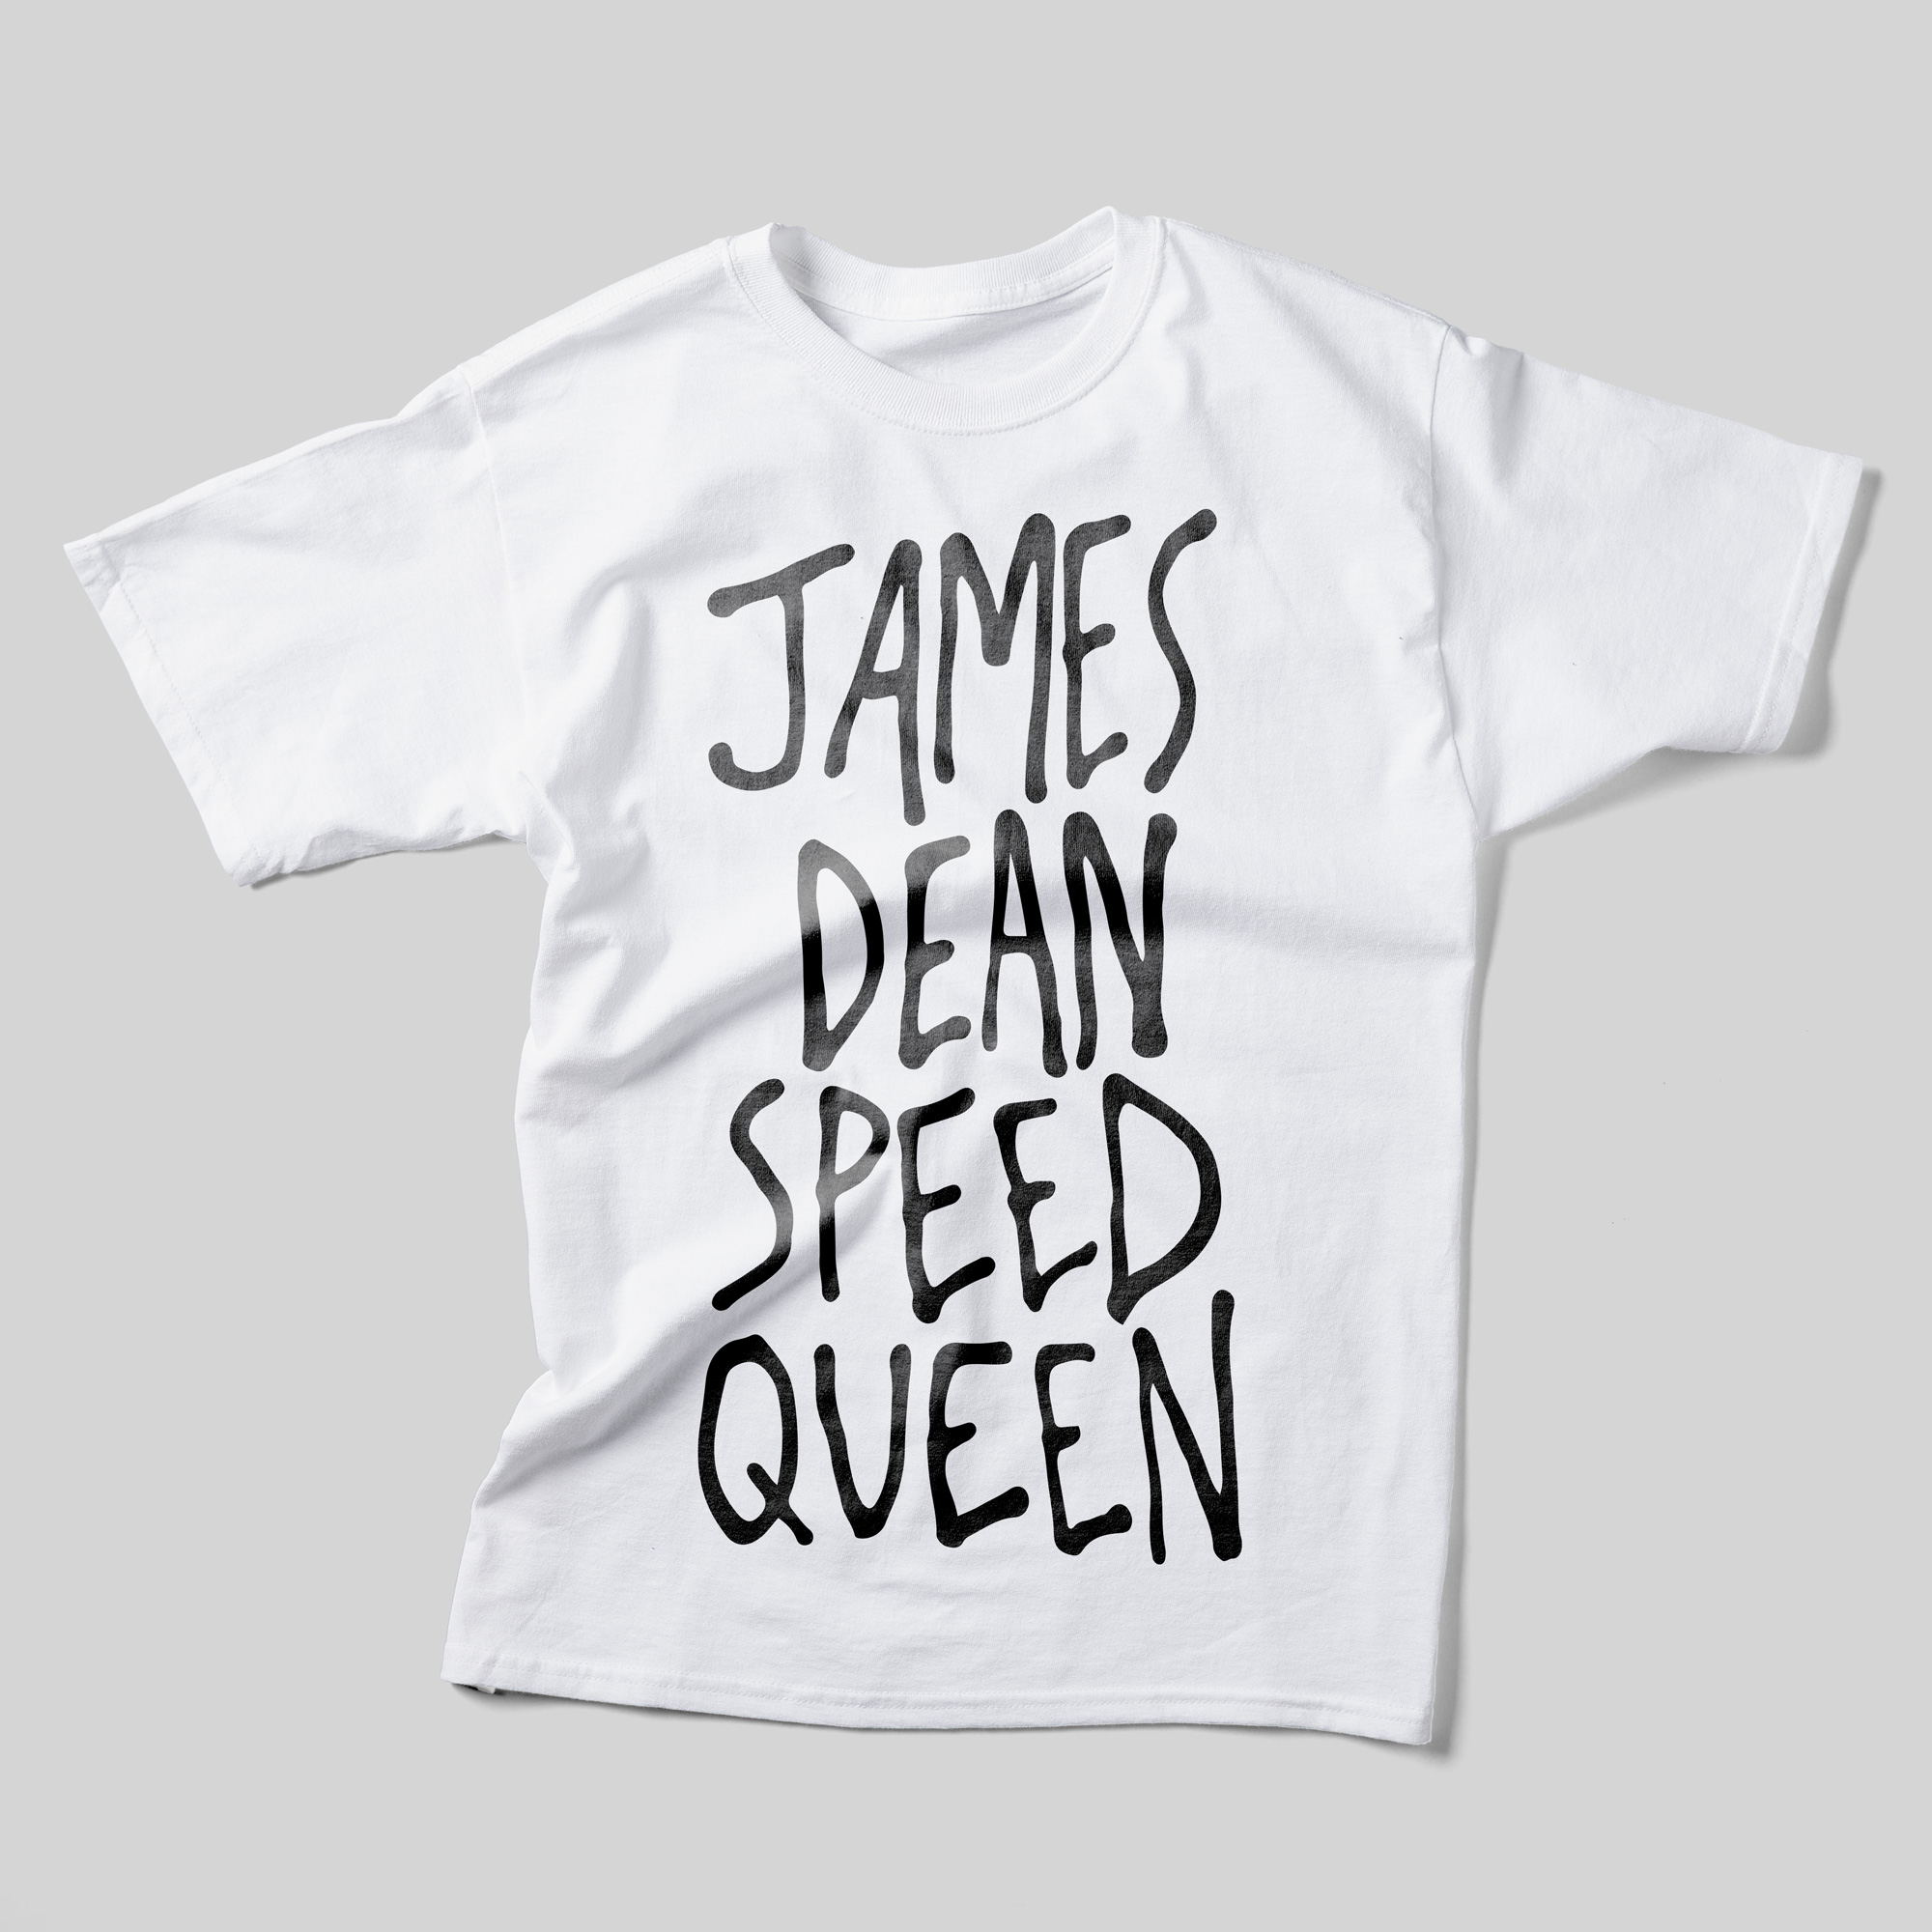 A white t-shirt that reads "James Dean Speed Queen" in black text, which takes up the front of the shirt.